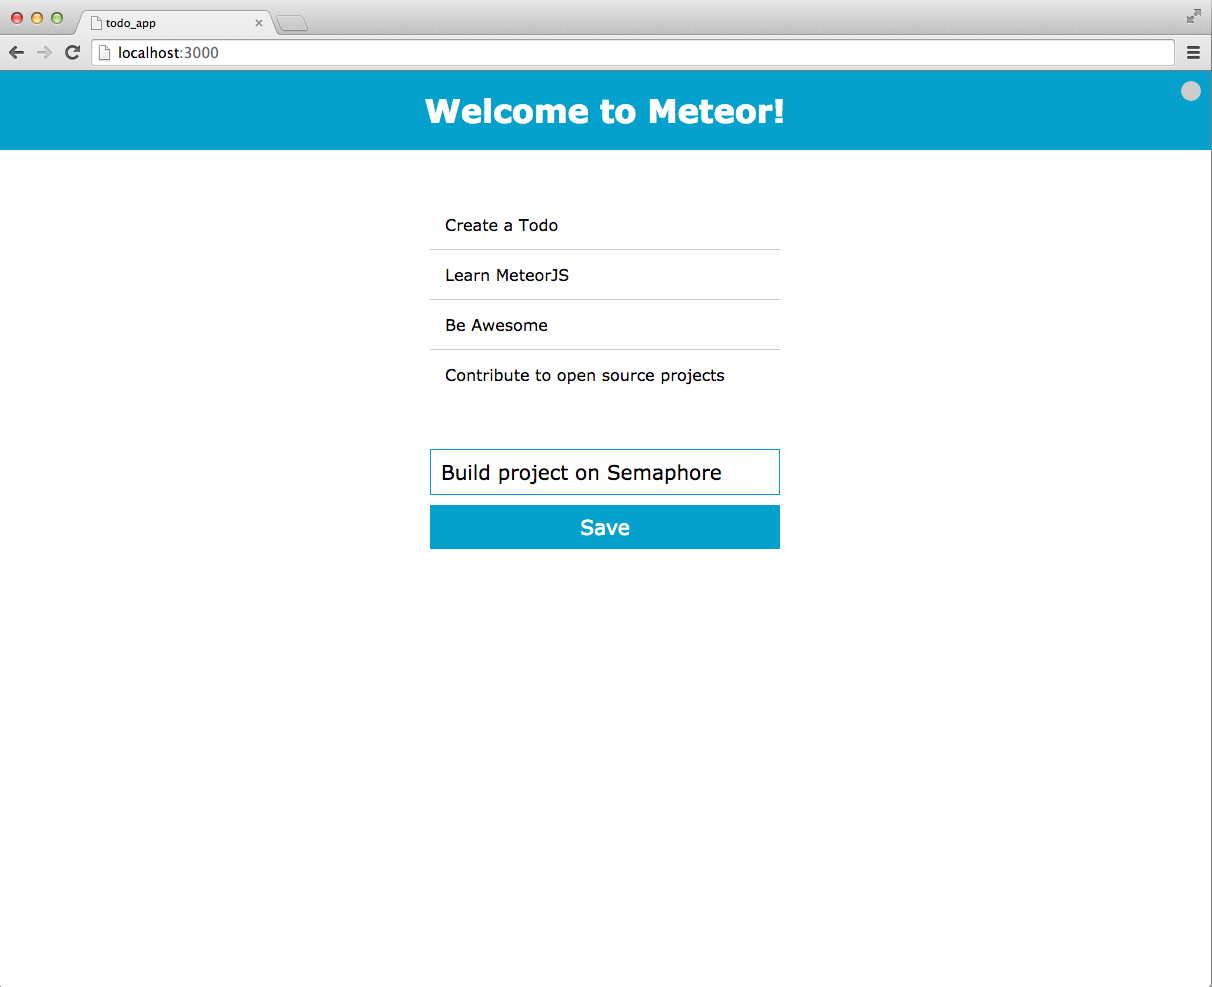 Solved] AutoForms with User Defined Schema - help - Meteor.js forums